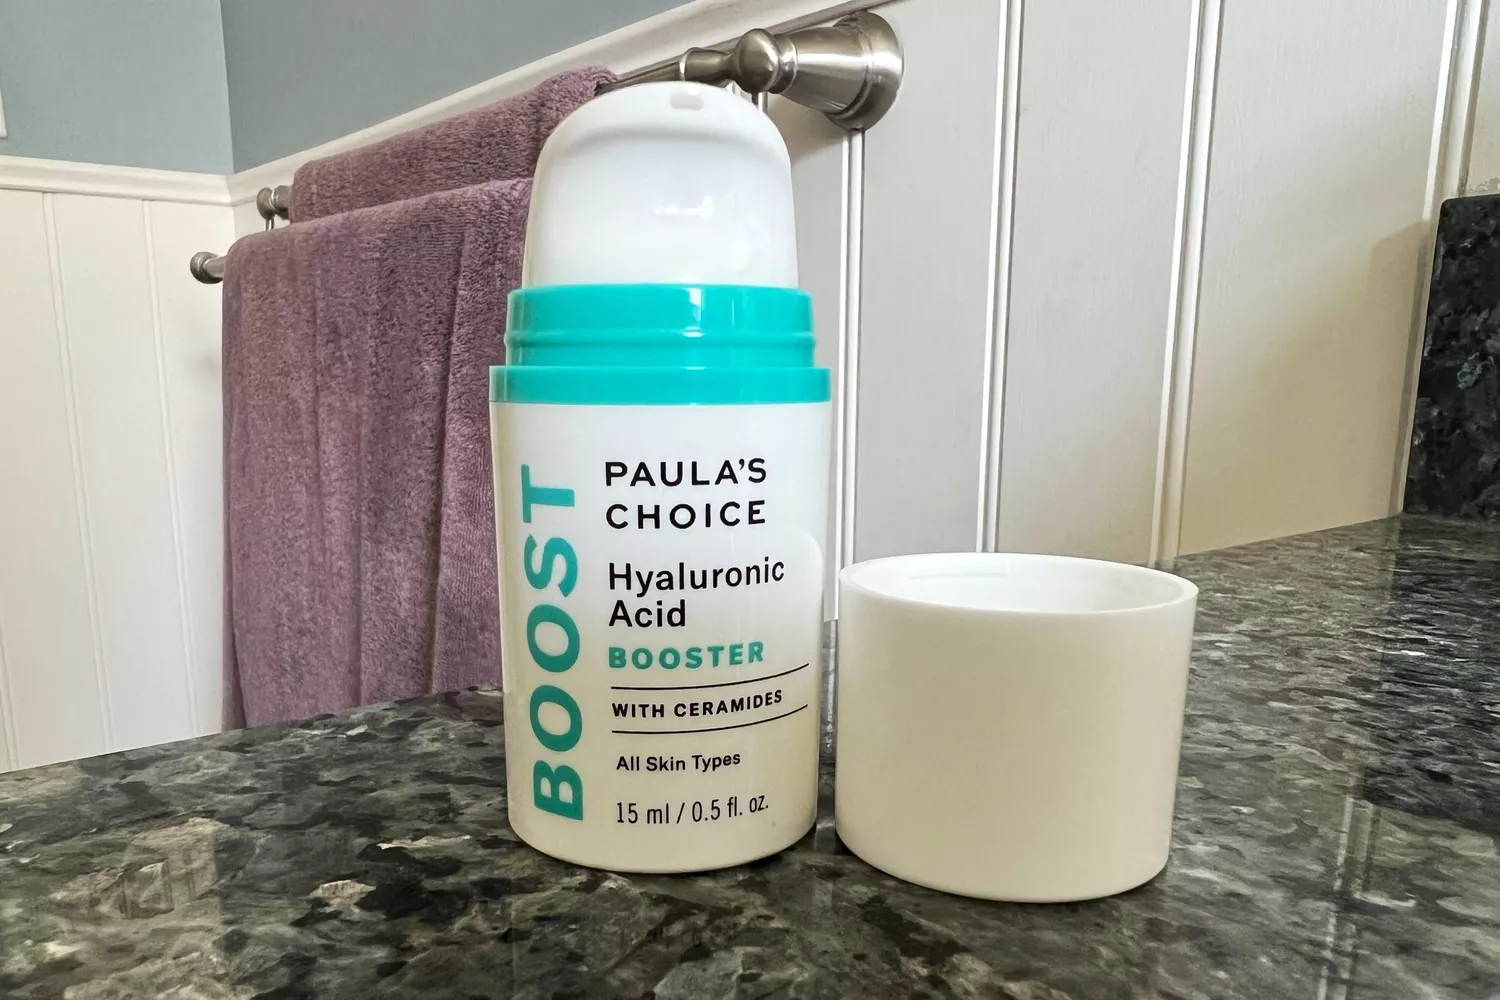 A bottle of Paula's Choice Hyaluronic Acid Booster with Ceramides on a bathroom counter